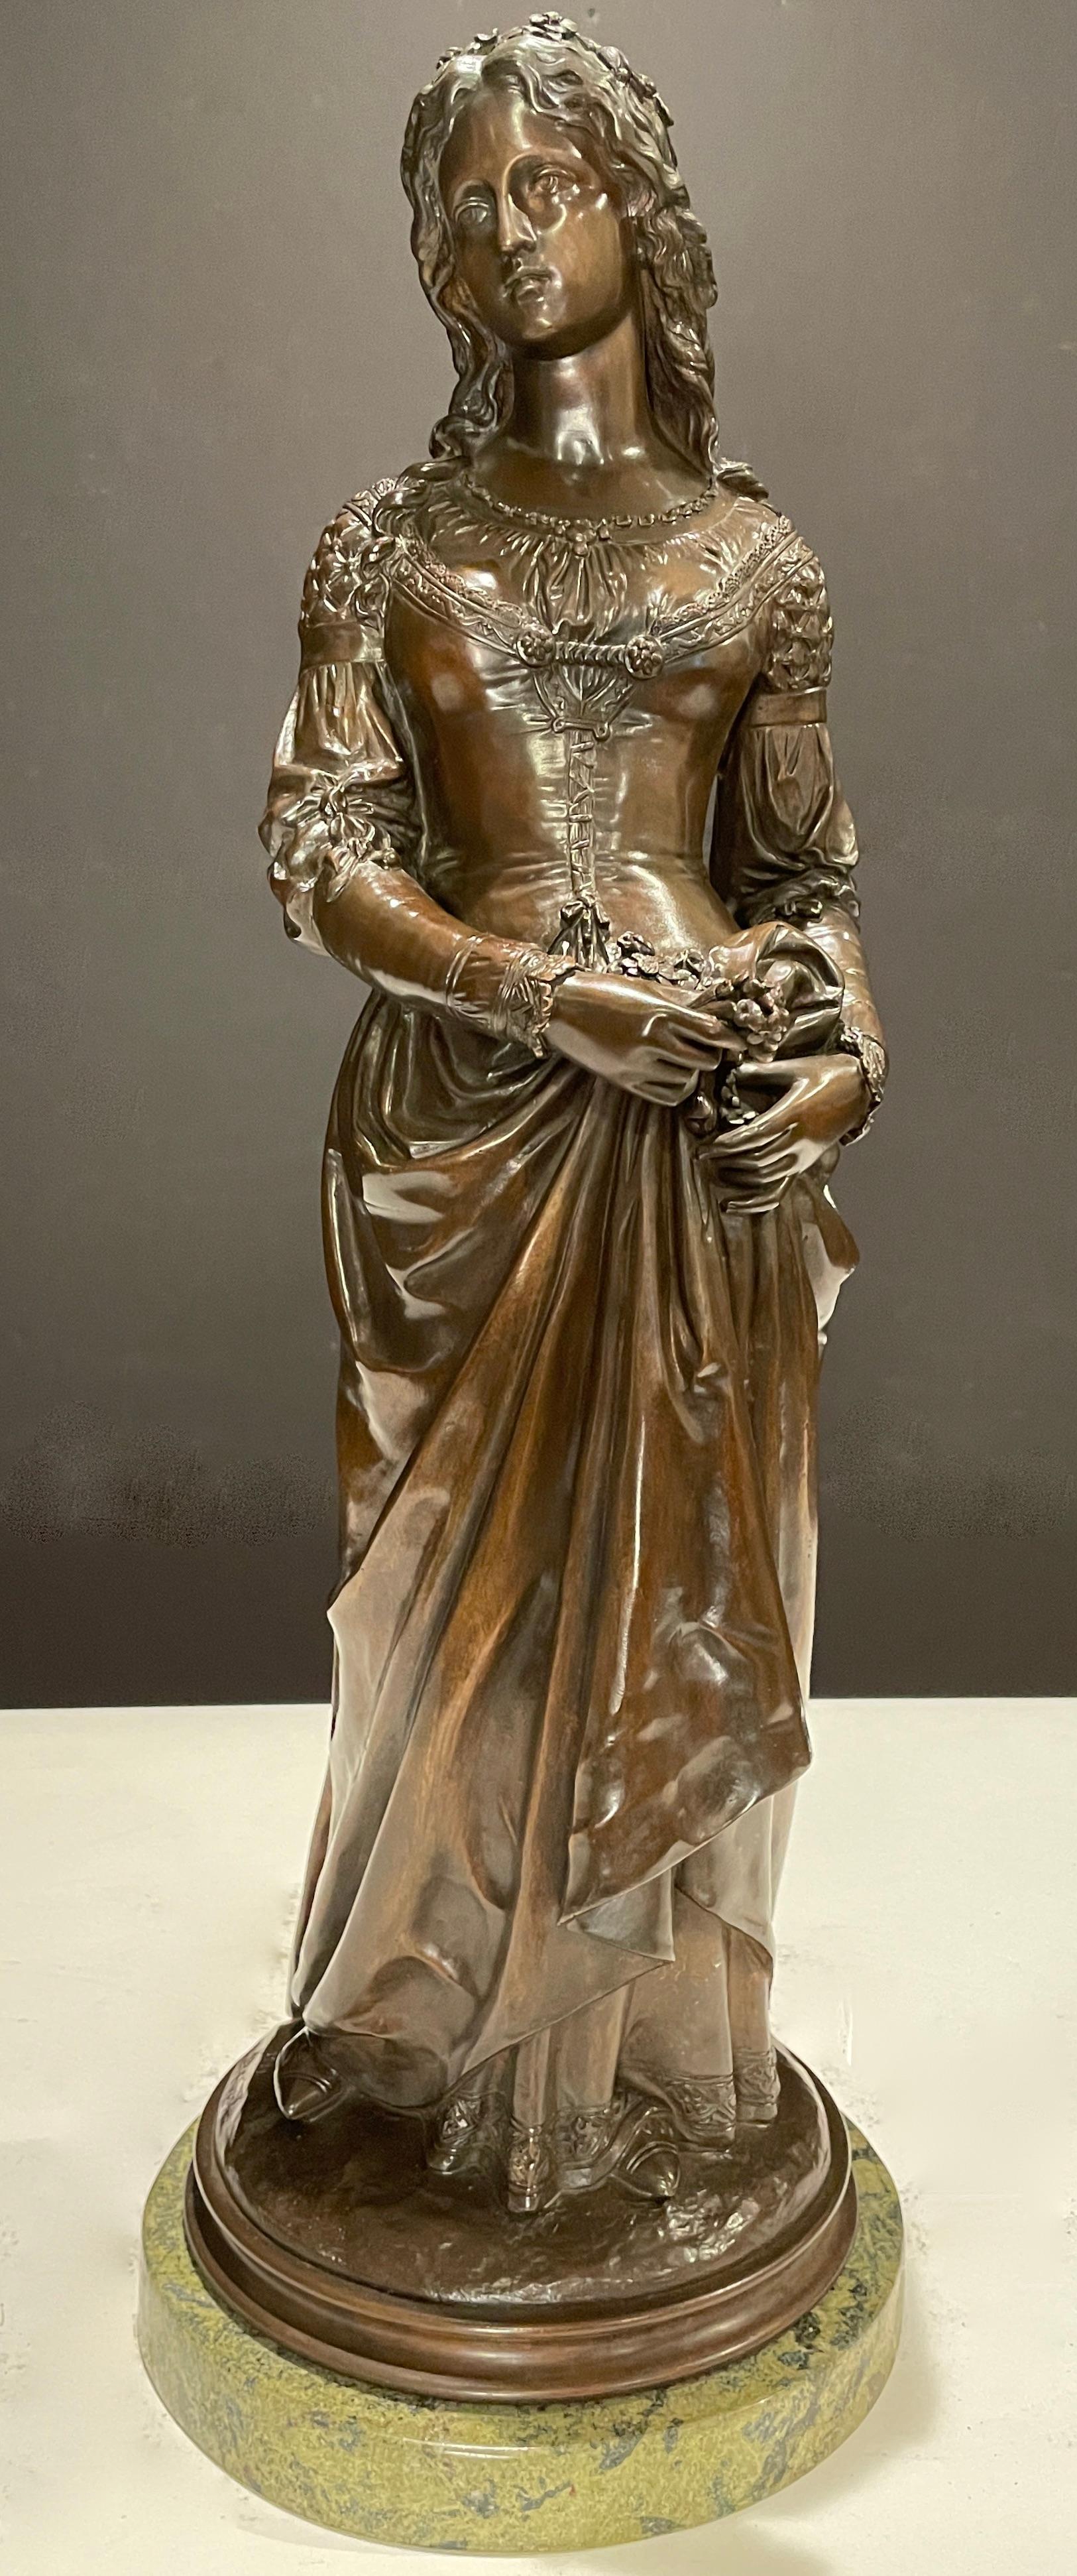 Highly detailed original 19th century bronze sculpture of young lady holding flowers. Dressed in beautiful gown with flowers in her hair. Signed on base, Debut.
Marcel Debut (1865 - 1933), son of sculptor Didier Debut was a French painter and